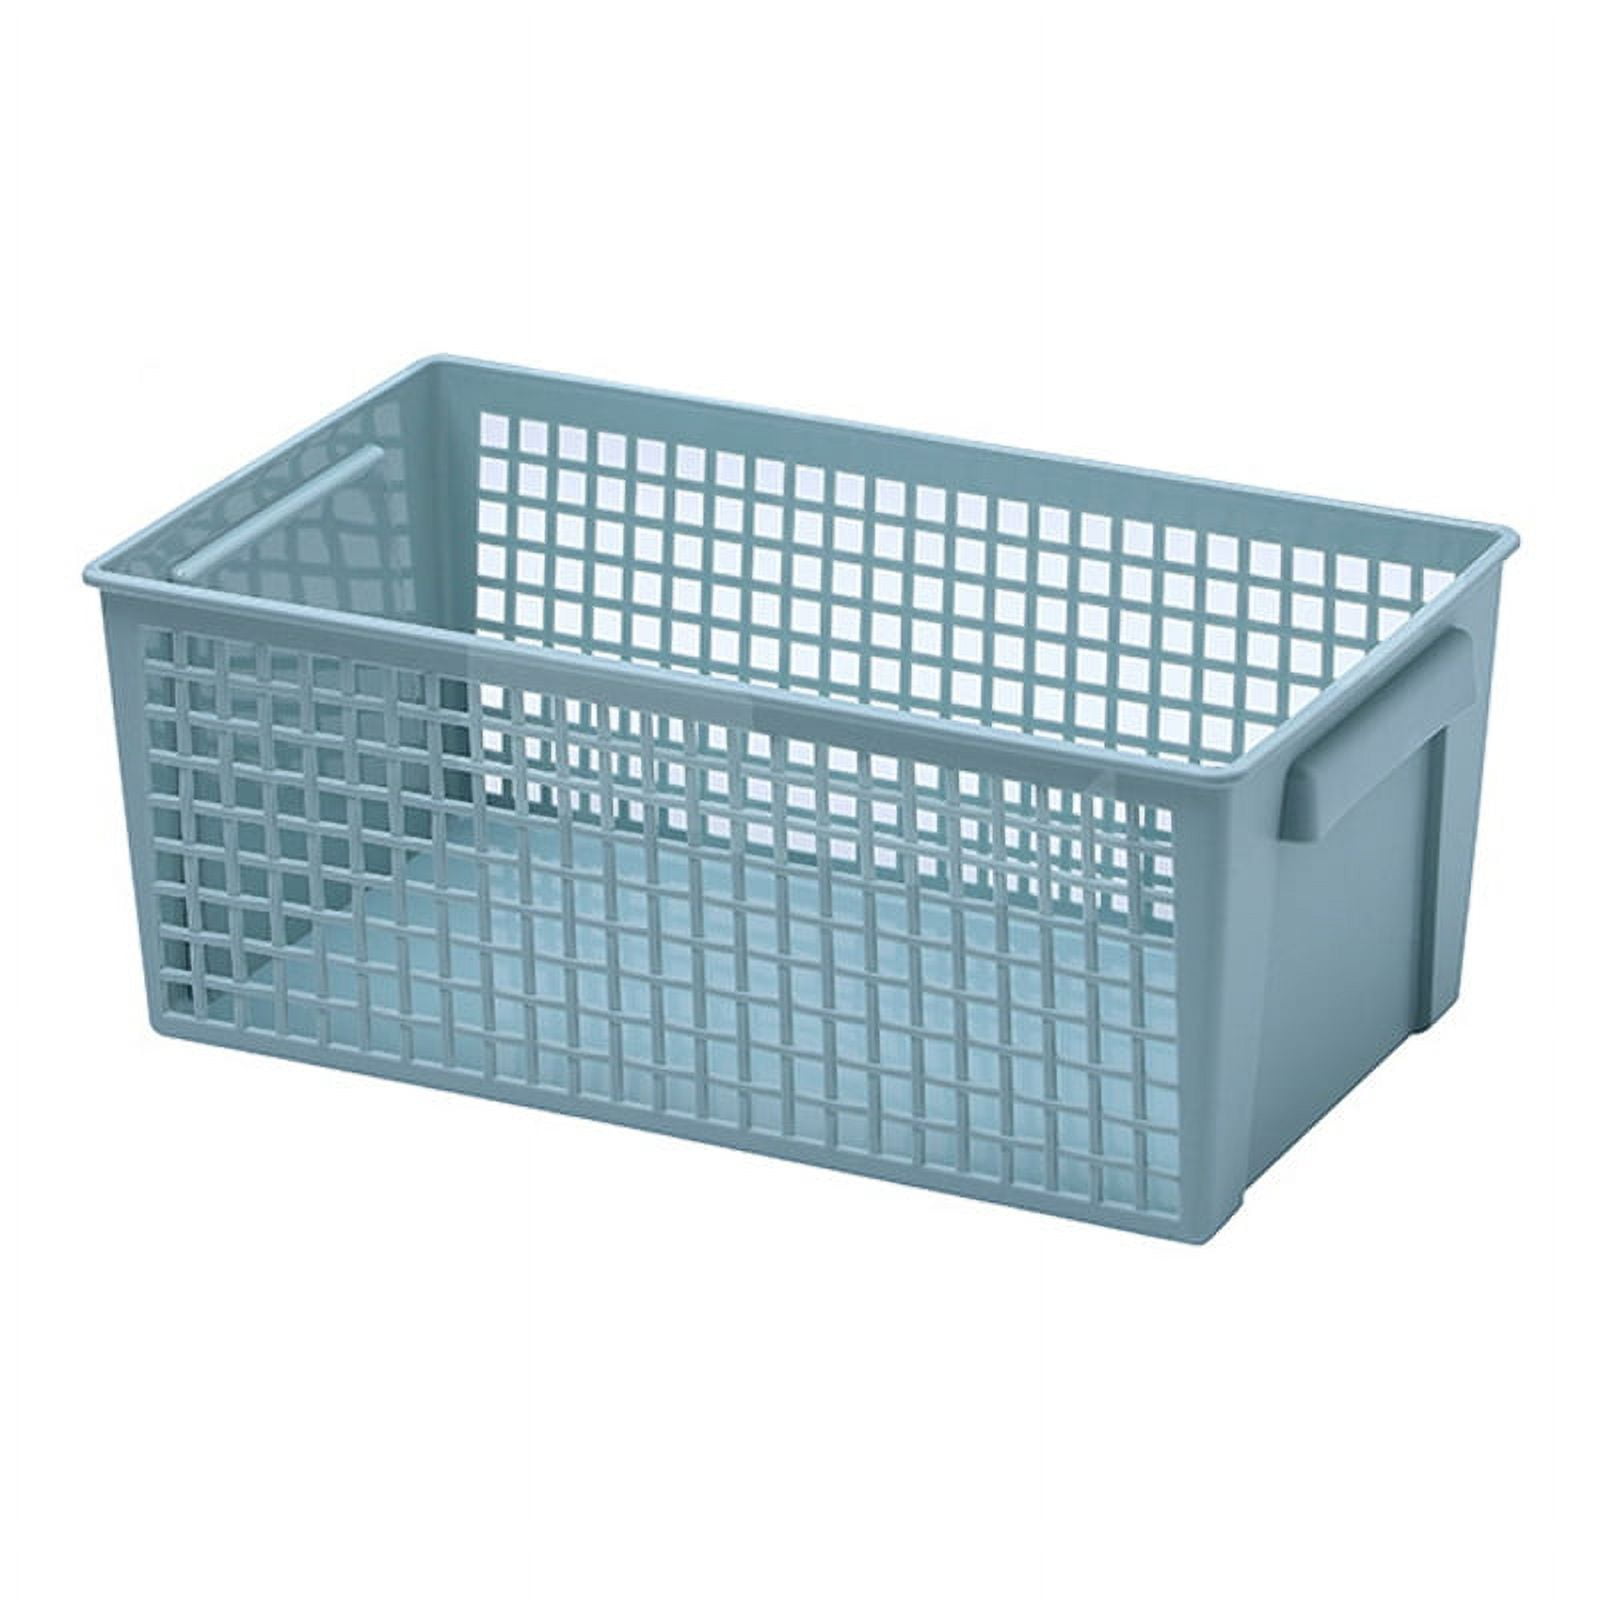 Yesland 8 Pack Plastic Storage Basket for Shelves, 12 x 6 x 5 Inches Basket  Organizer Bin with Handles Sturdy Closet Baskets for Home Office Closet 